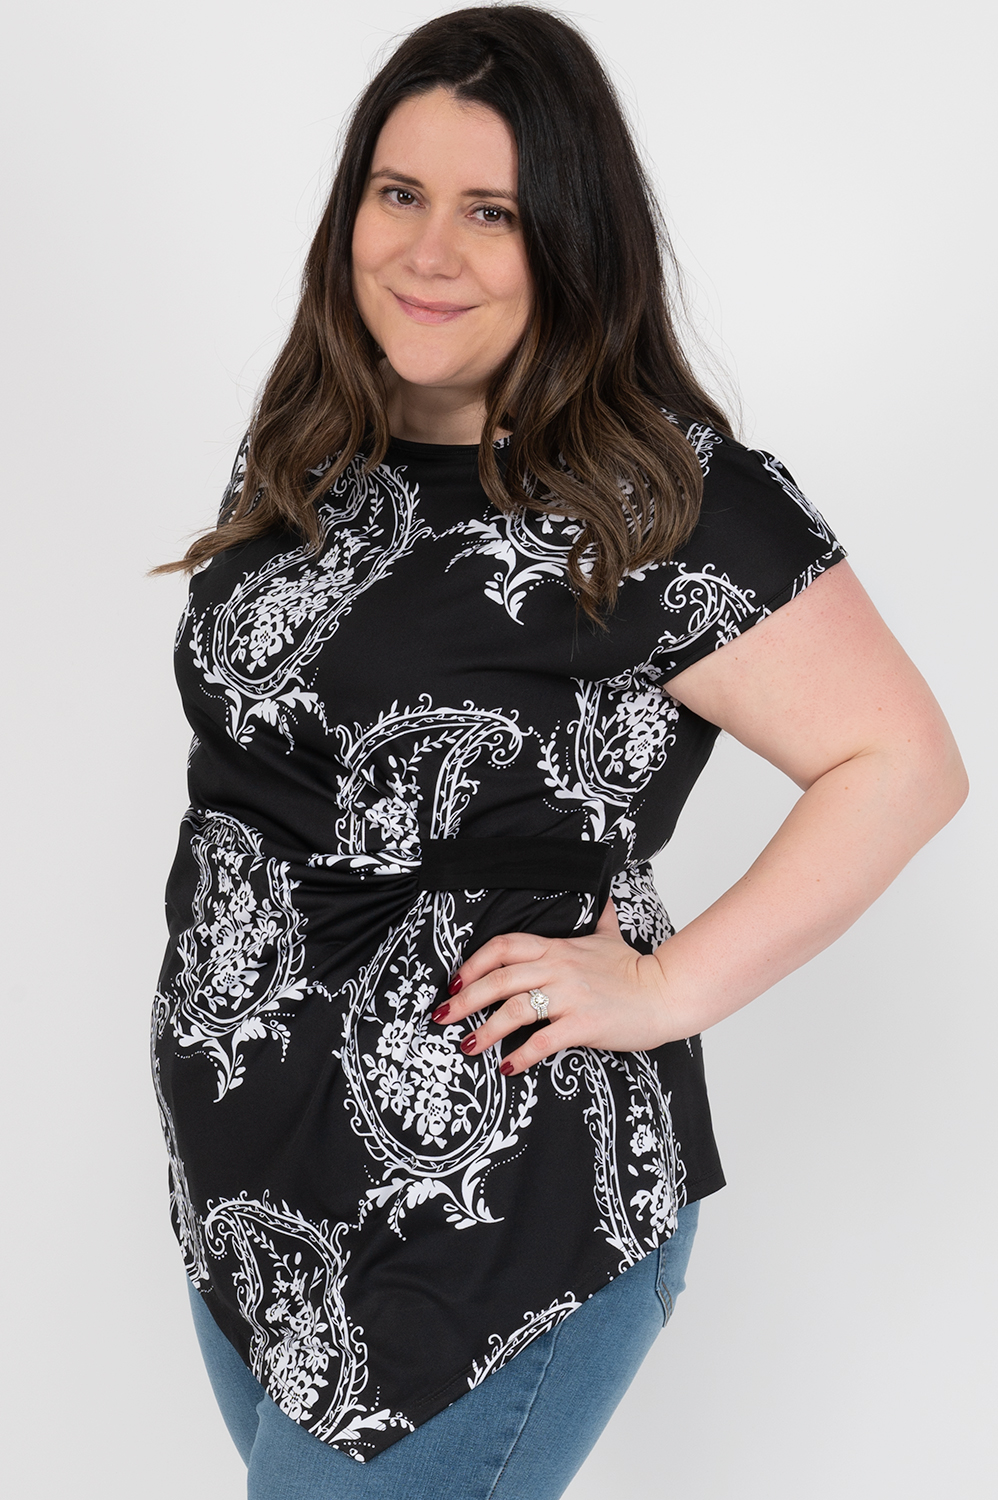 Cap sleeve tunic blouse with contrasting side tab - Black paisley - Plus Size